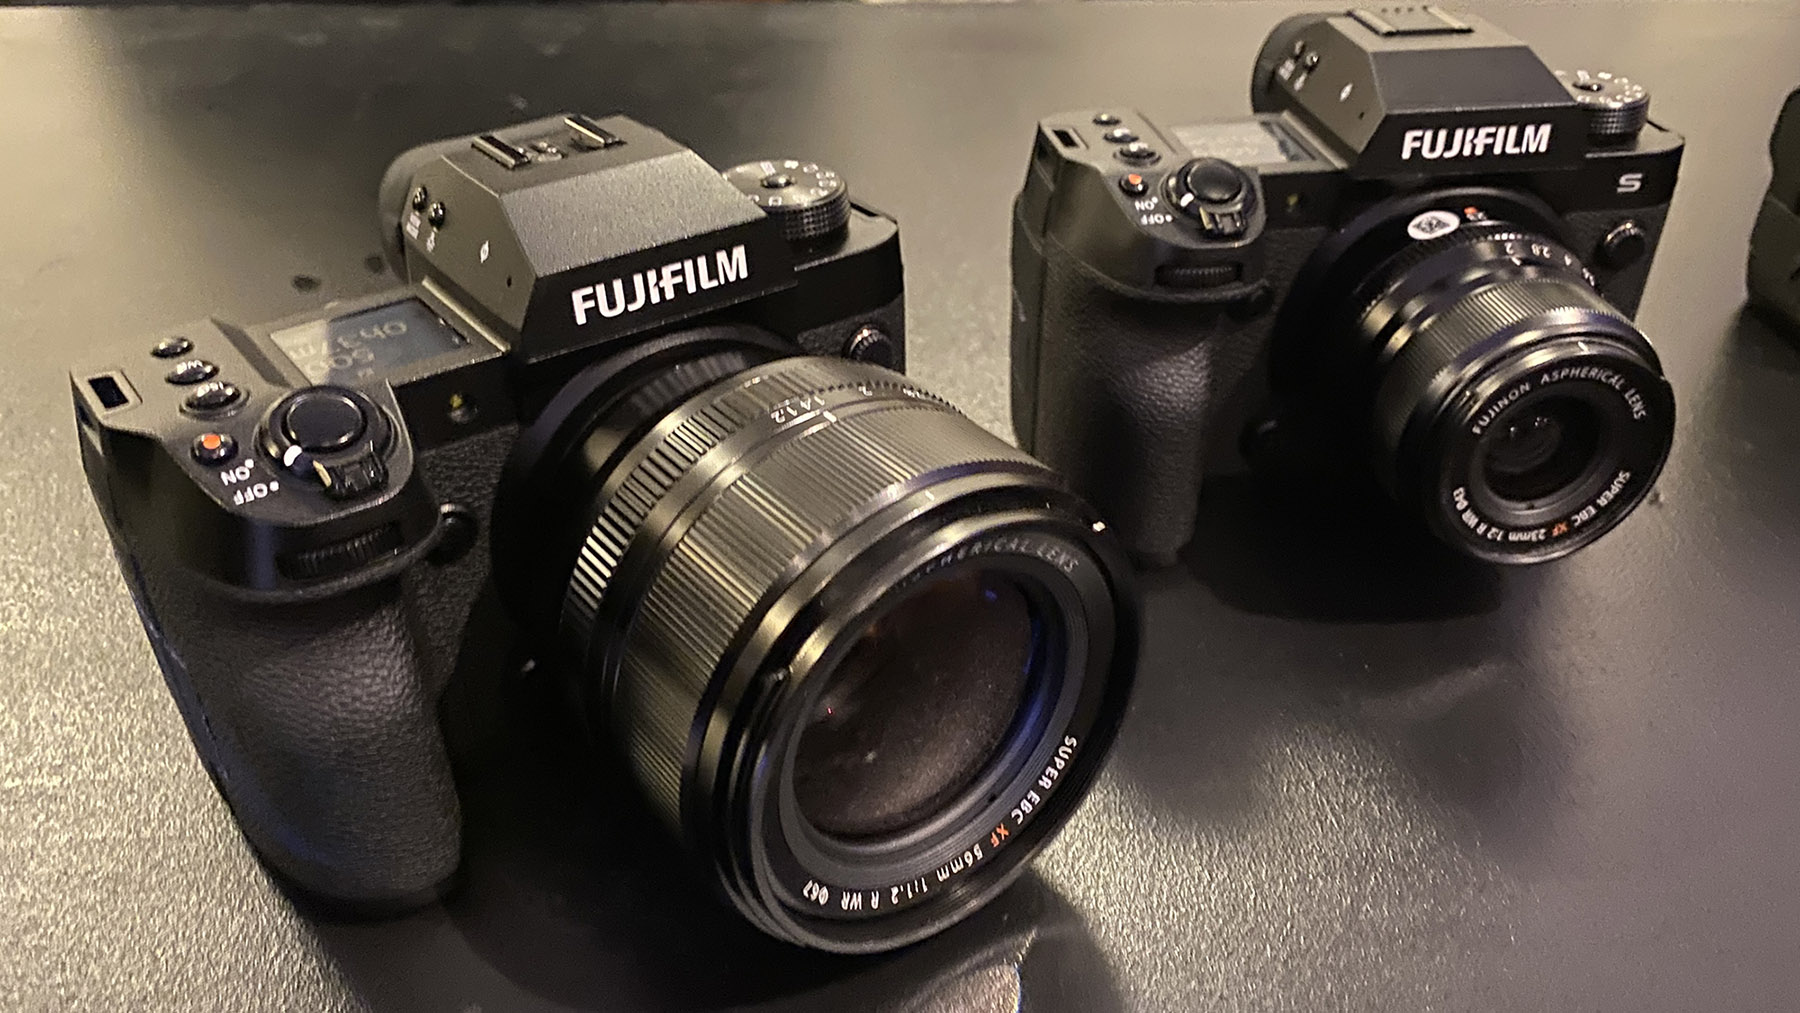 The Fujifilm X-H2 and X-H2S cameras sitting on a table